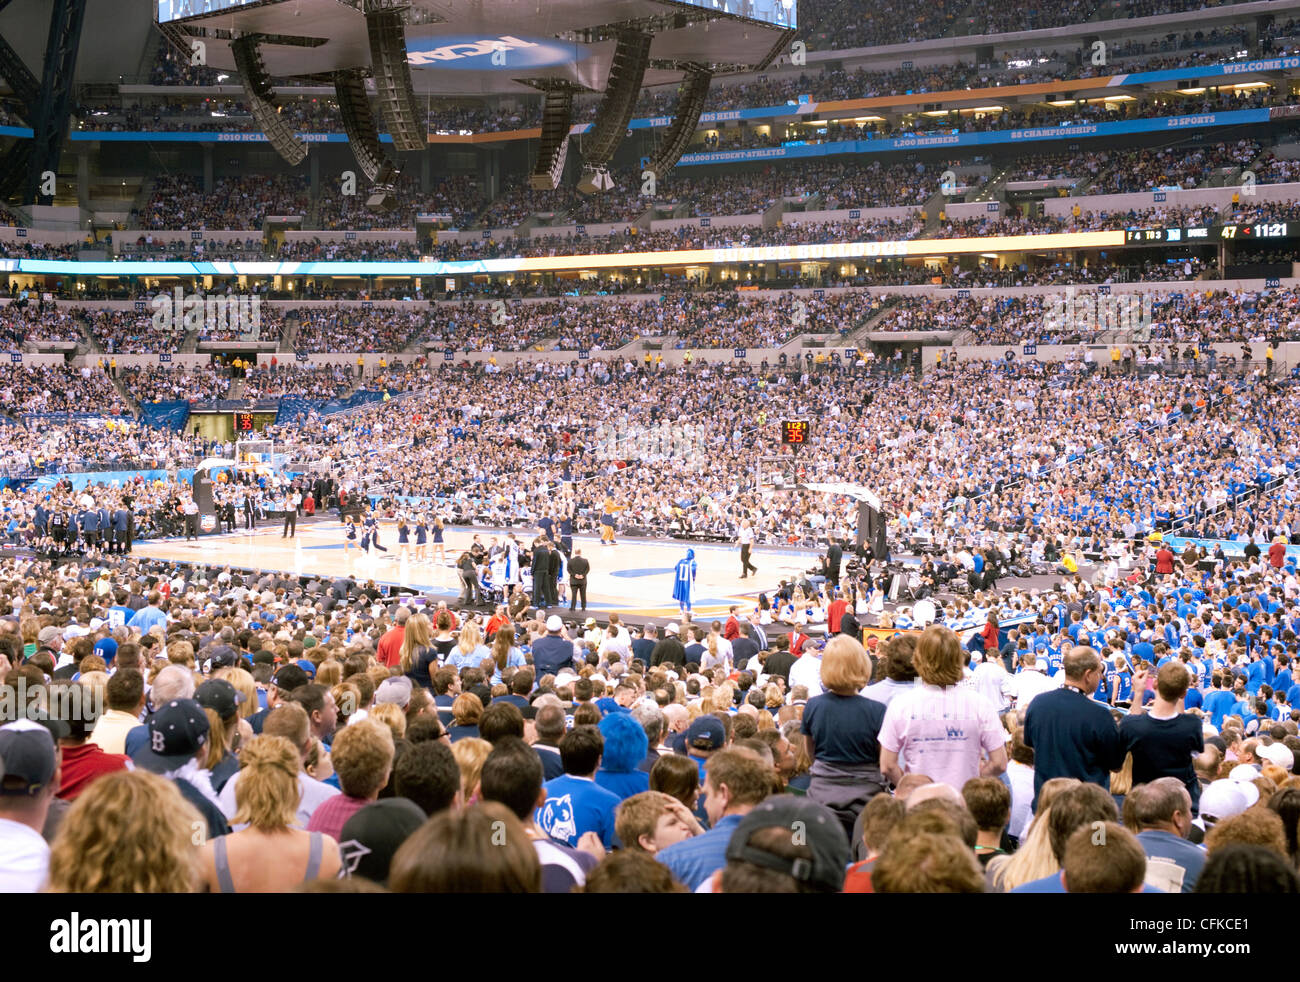 Massive crowds inside the Lucas Oil Stadium, Indianapolis, awaiting the start of a basketball game. Stock Photo